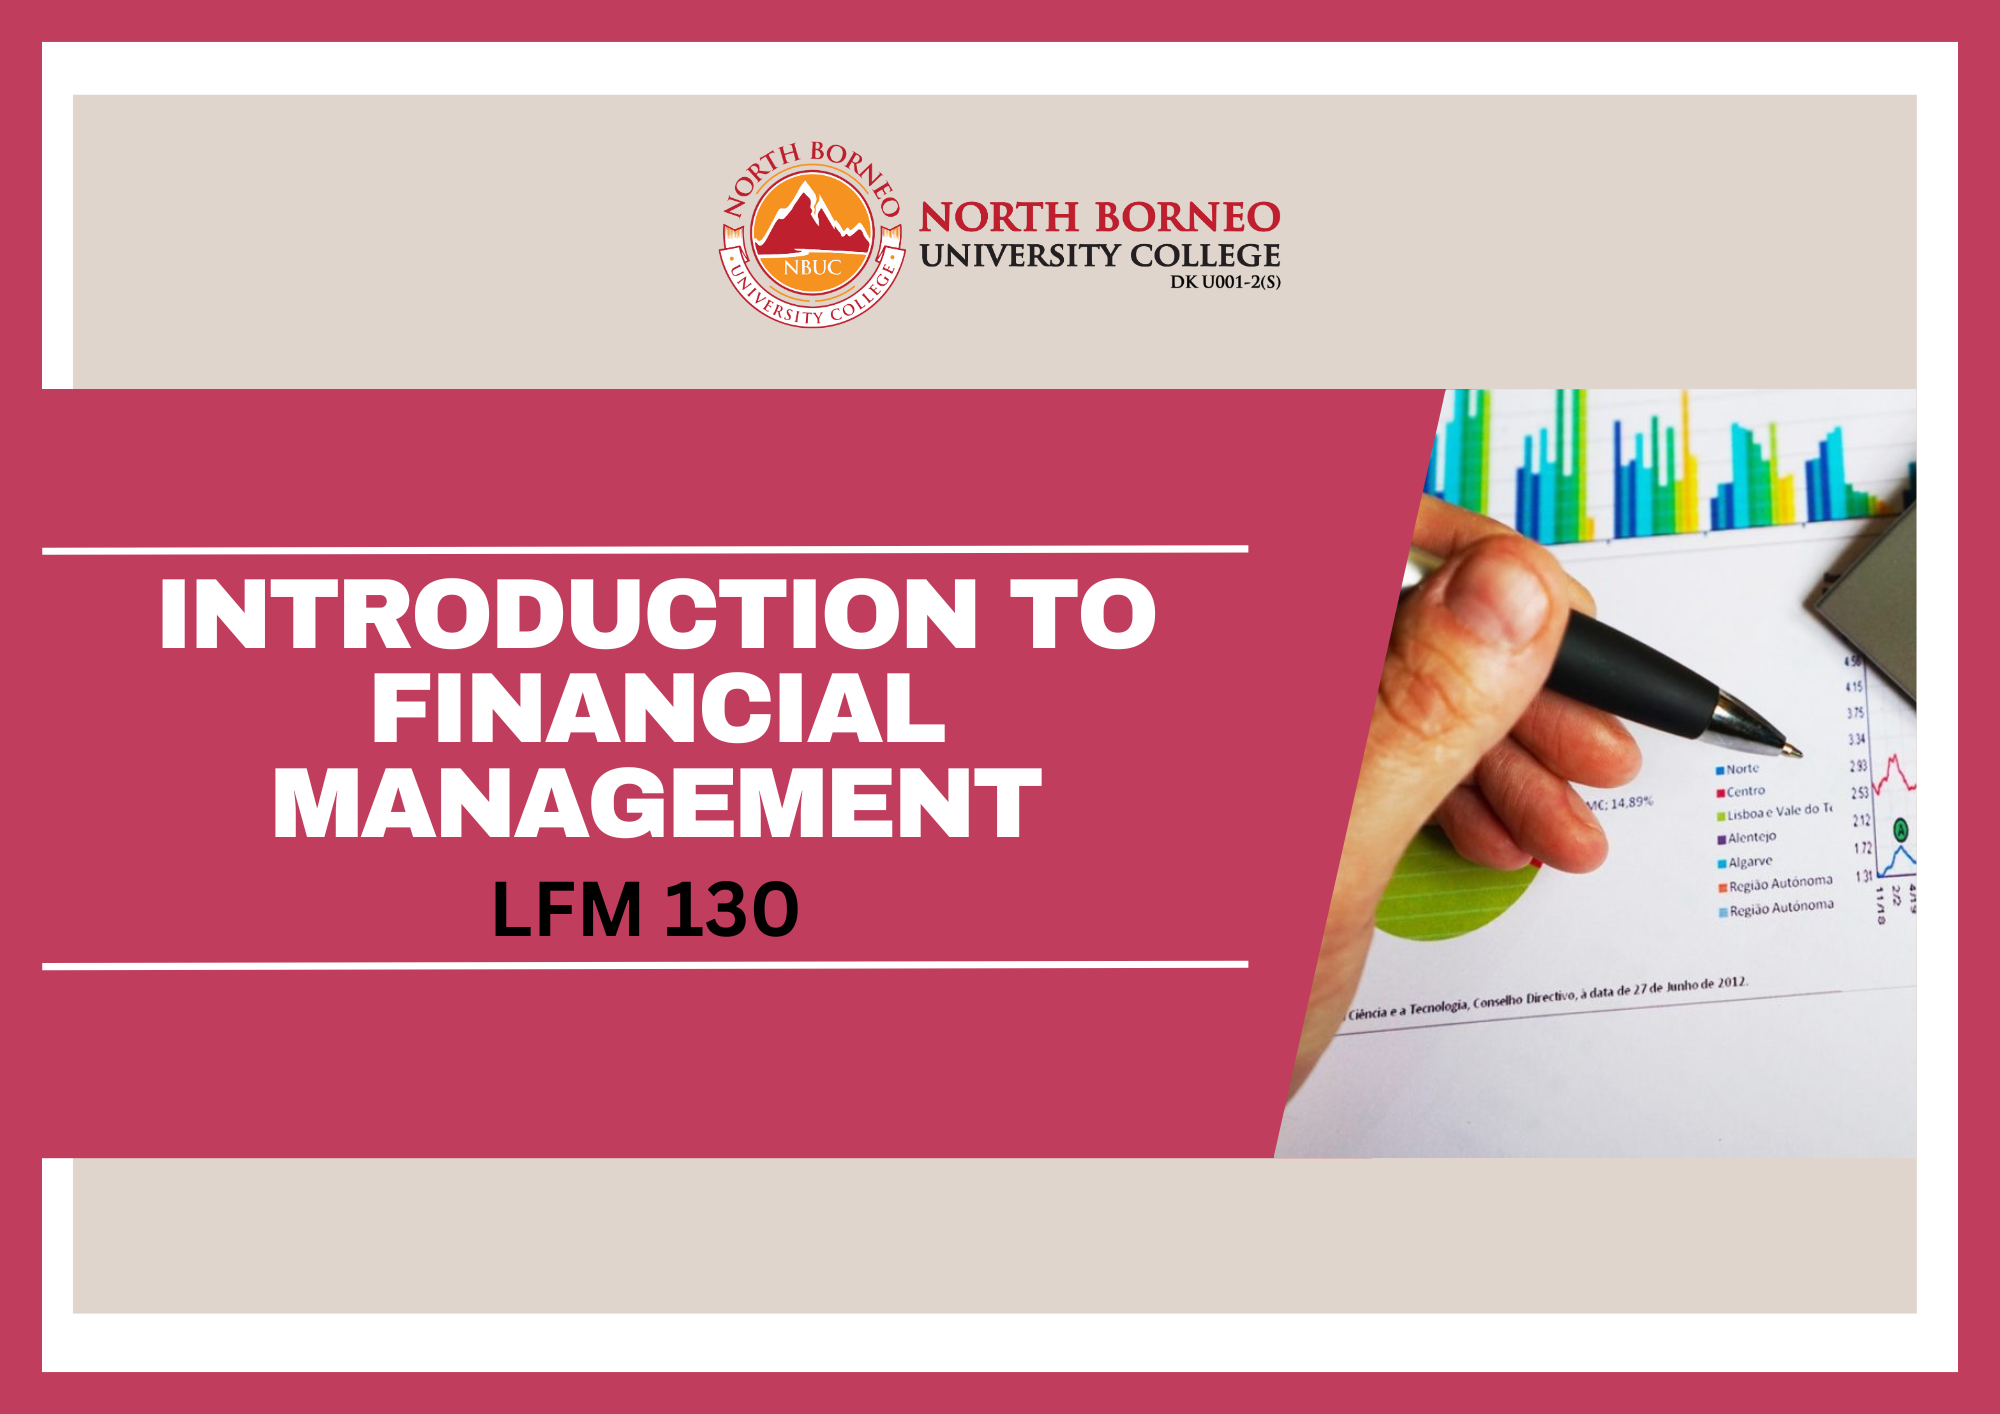 INTRODUCTION TO FINANCIAL MANAGEMENT																						